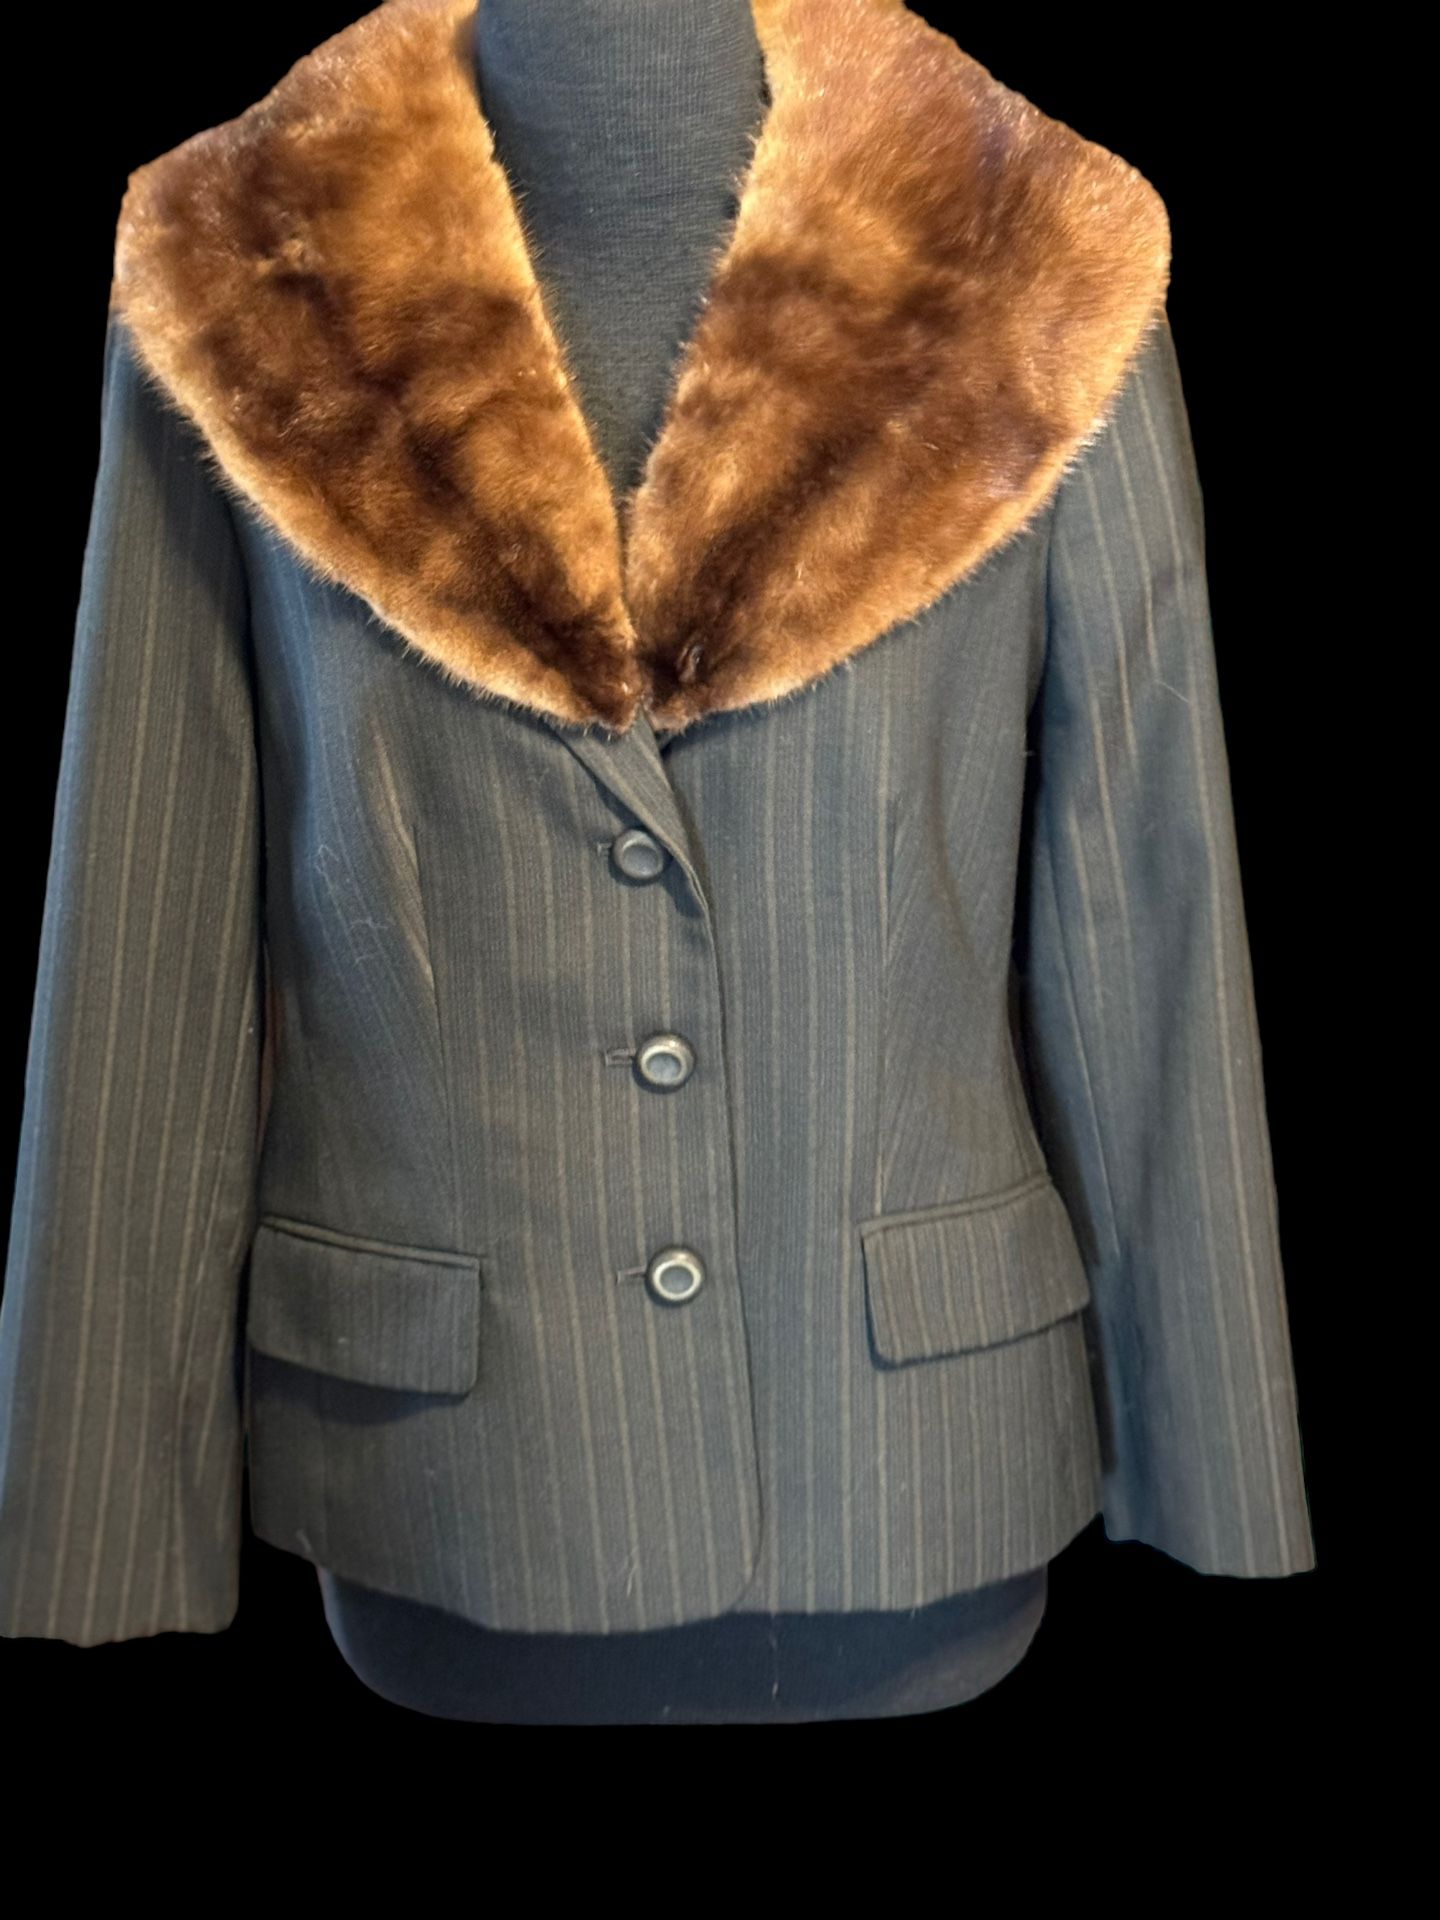 Vintage 80's Upcycled Pin Stripe Suit With Mink Collar 